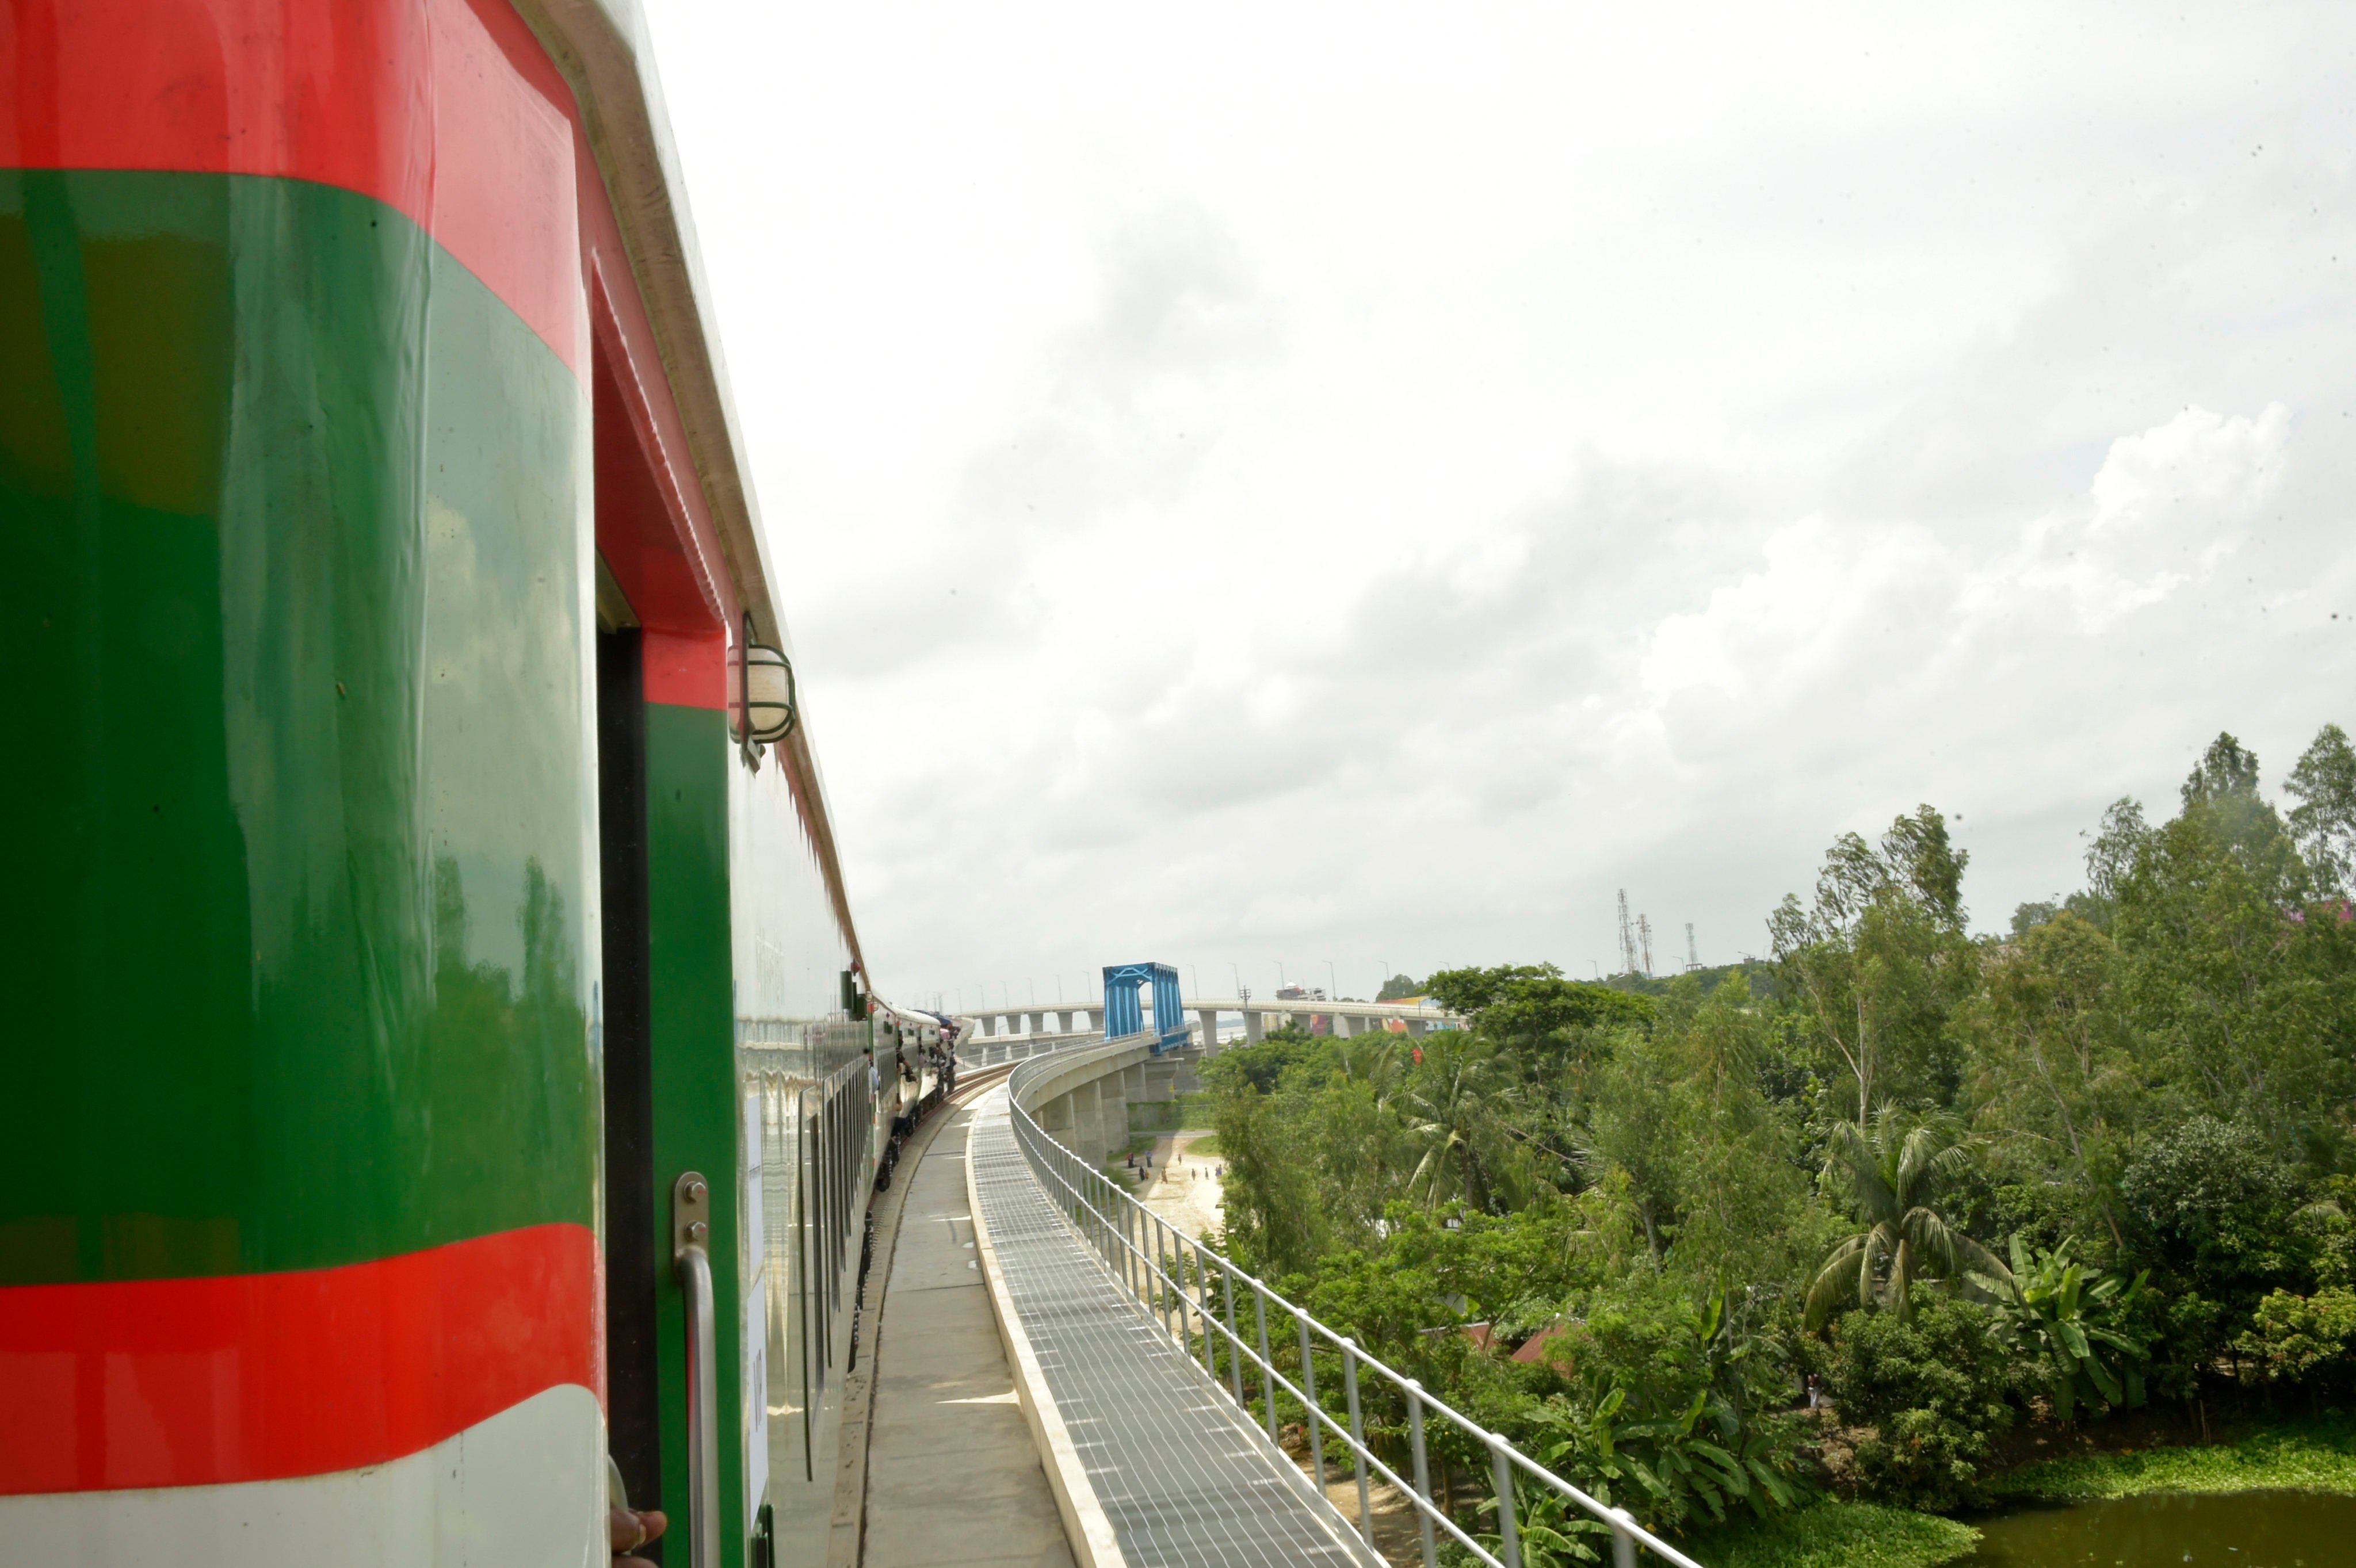 A train is pictured during a trial run on September 8 along a newly-constructed railway on Padma Bridge in Dhaka, Bangladesh. The railway connects with other belt and road projects and will serve as an important link between China and a pan-Asian rail network. Photo: Xinhua